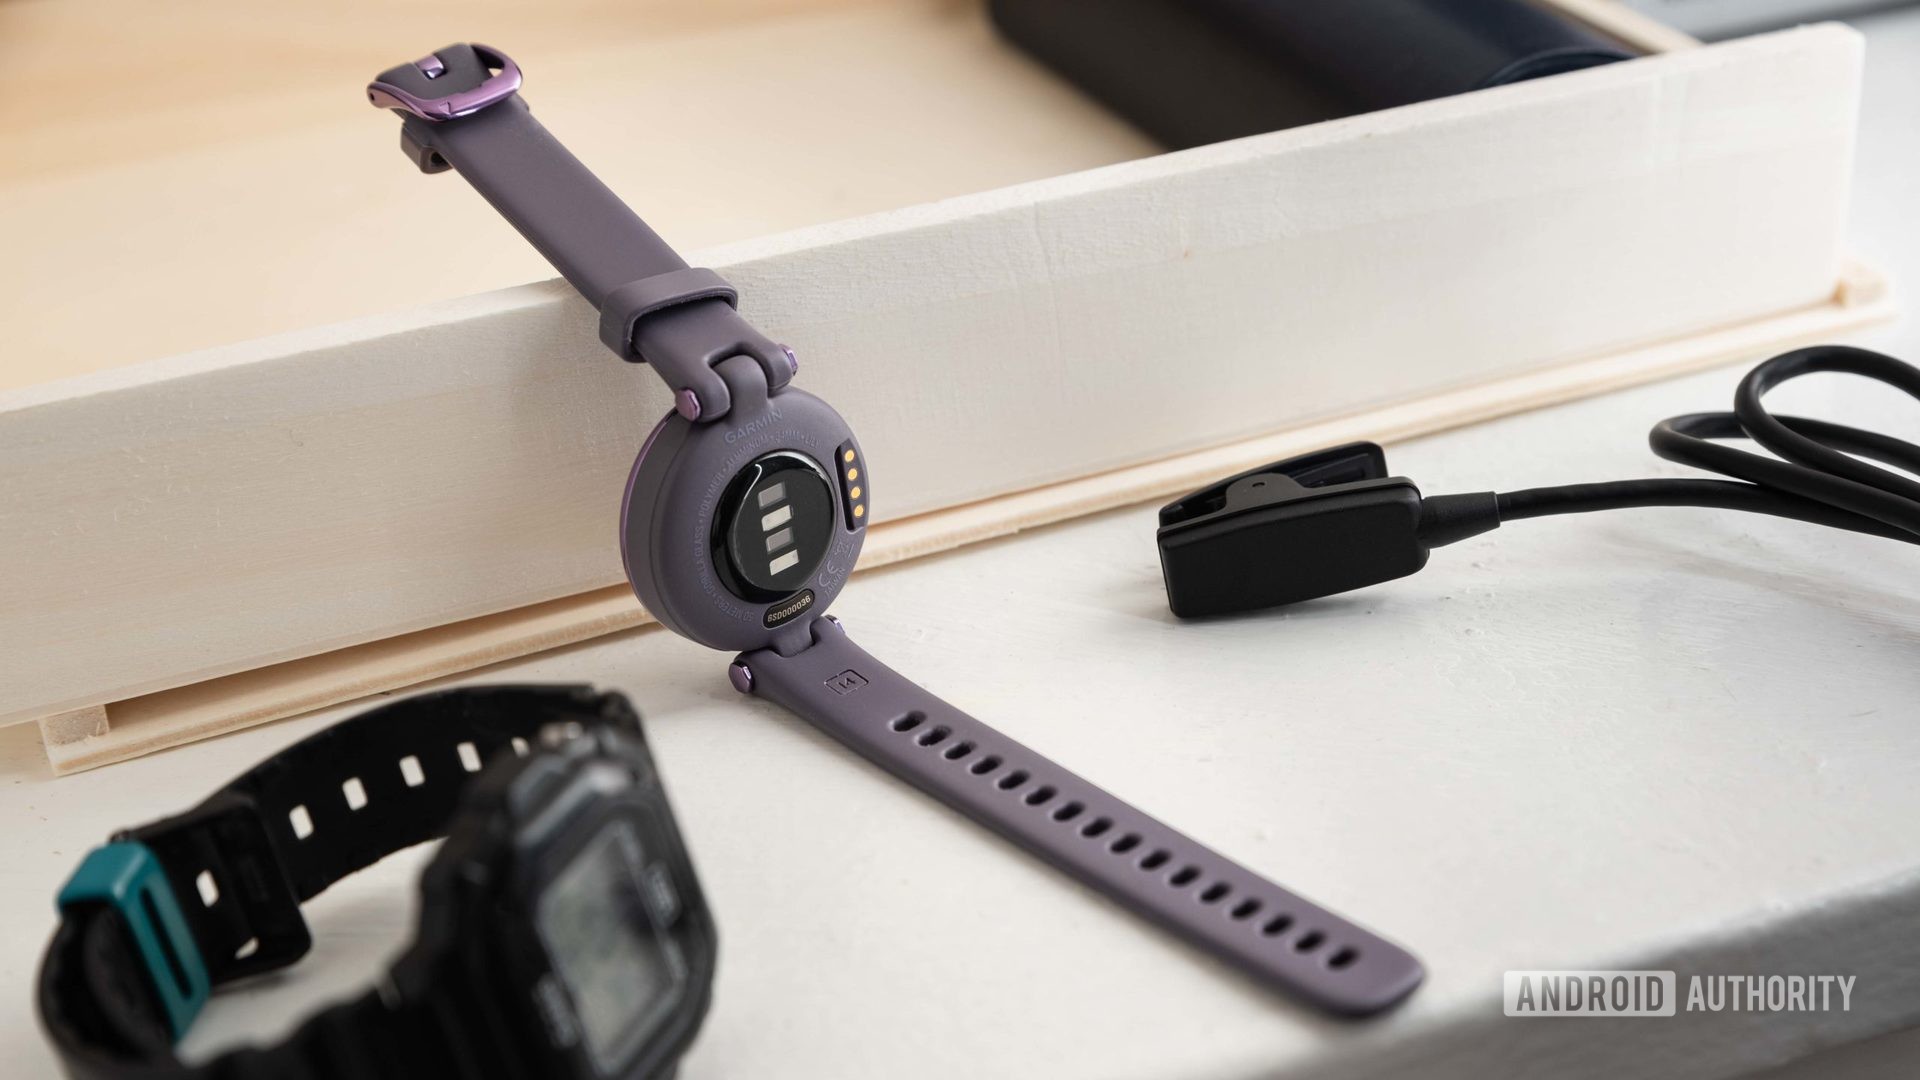 The Garmin Lily Sport Edition smart watch next to the proprietary charging cable and a Casio watch.